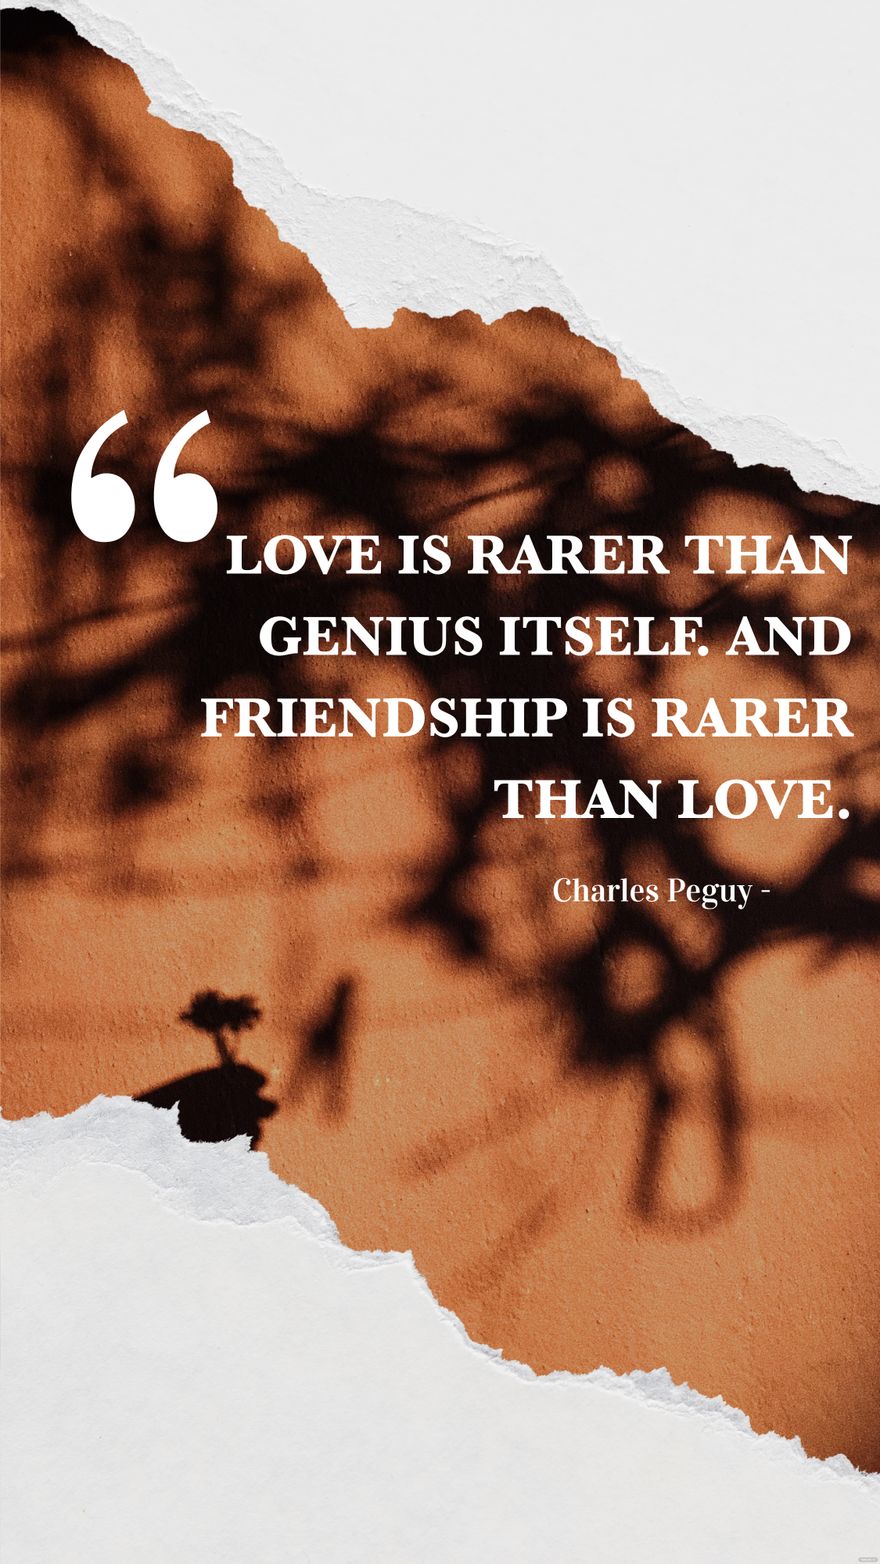 Charles Peguy - Love is rarer than genius itself. And friendship is rarer than love.